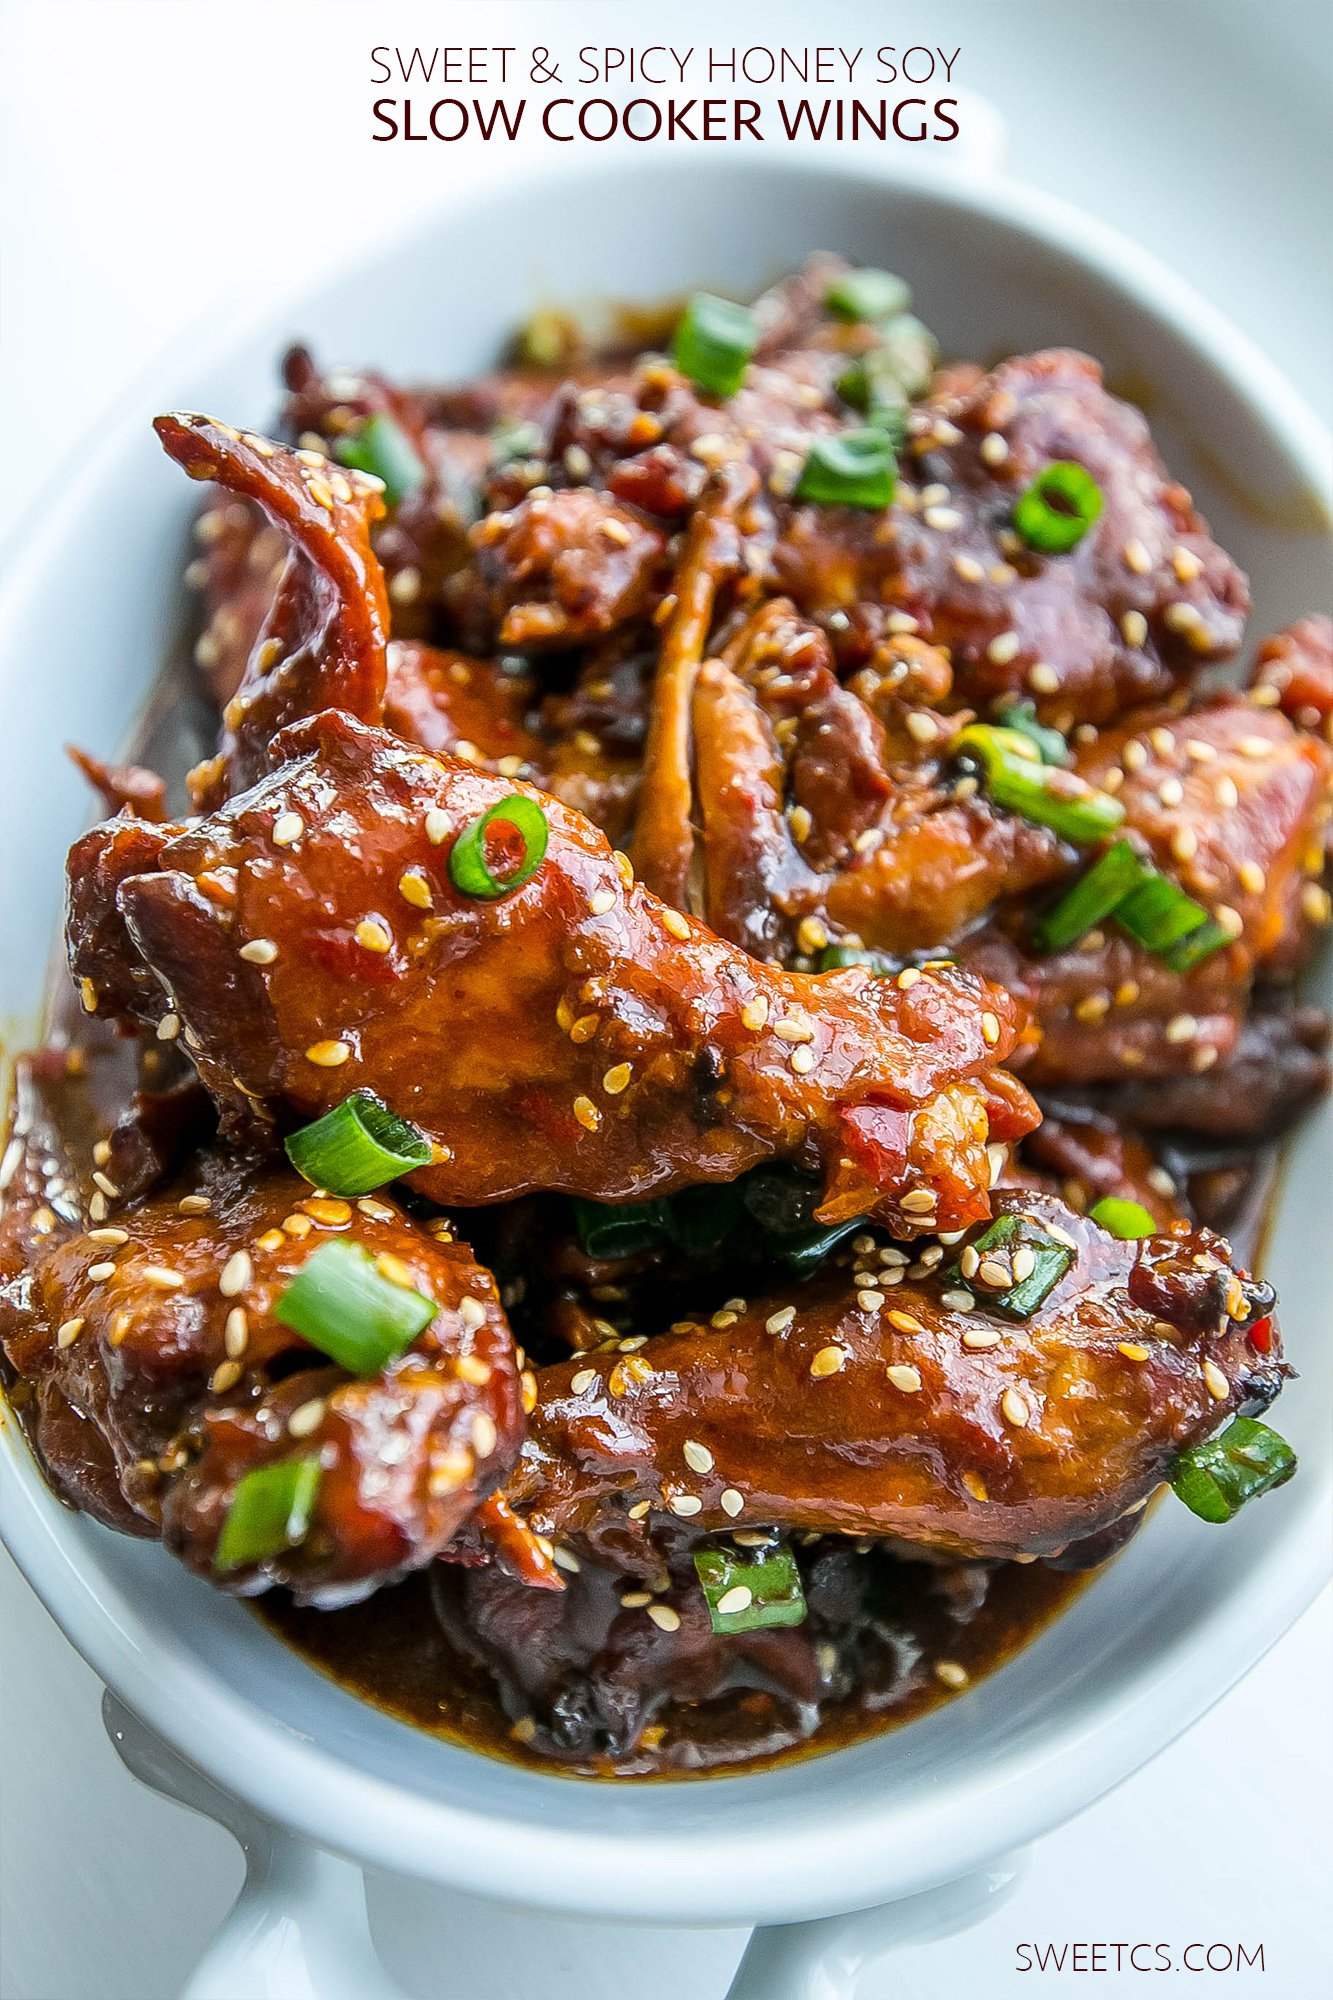 sweet-and-spicy-honey-soy-slow-sooker-wings-the-most-delicious-and-easy-wing-recipe-ever